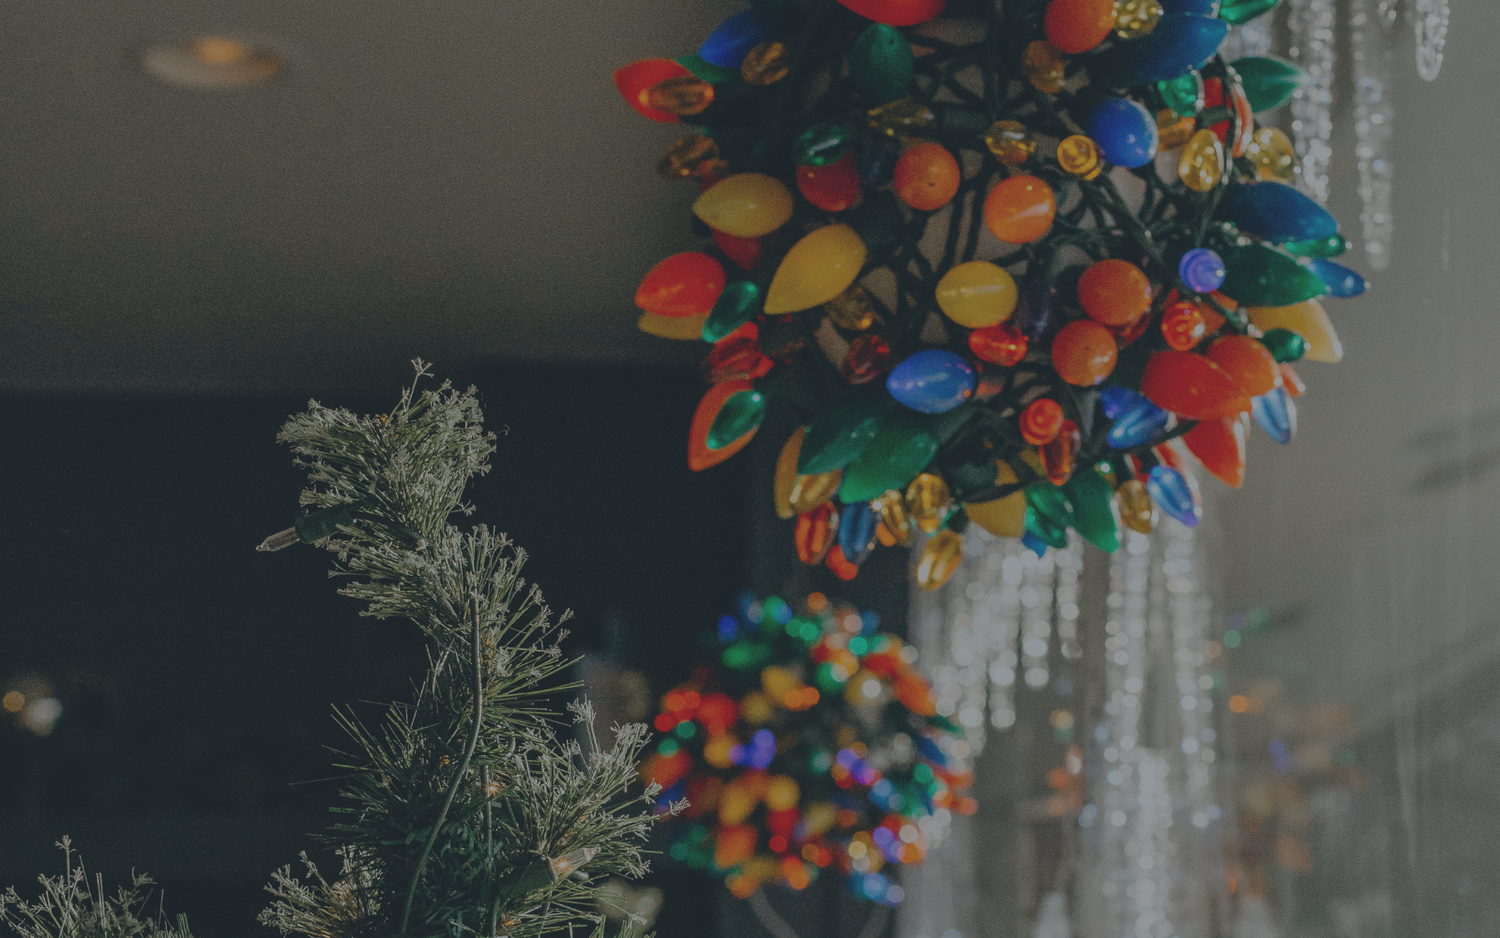 5 simple things I’ve realized this holiday season